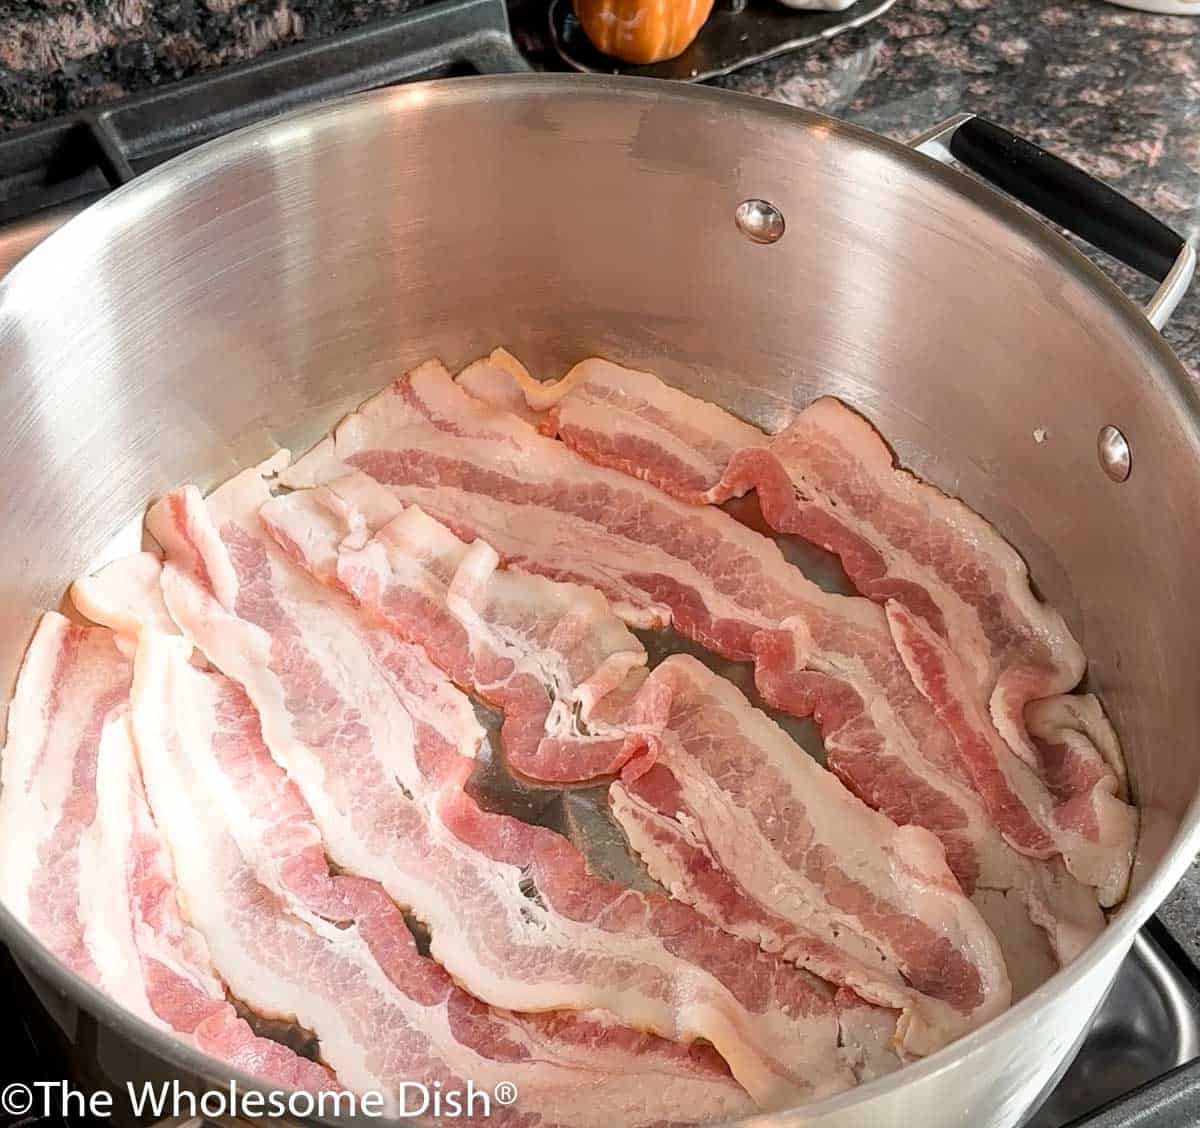 Sliced bacon cooking in a pot.